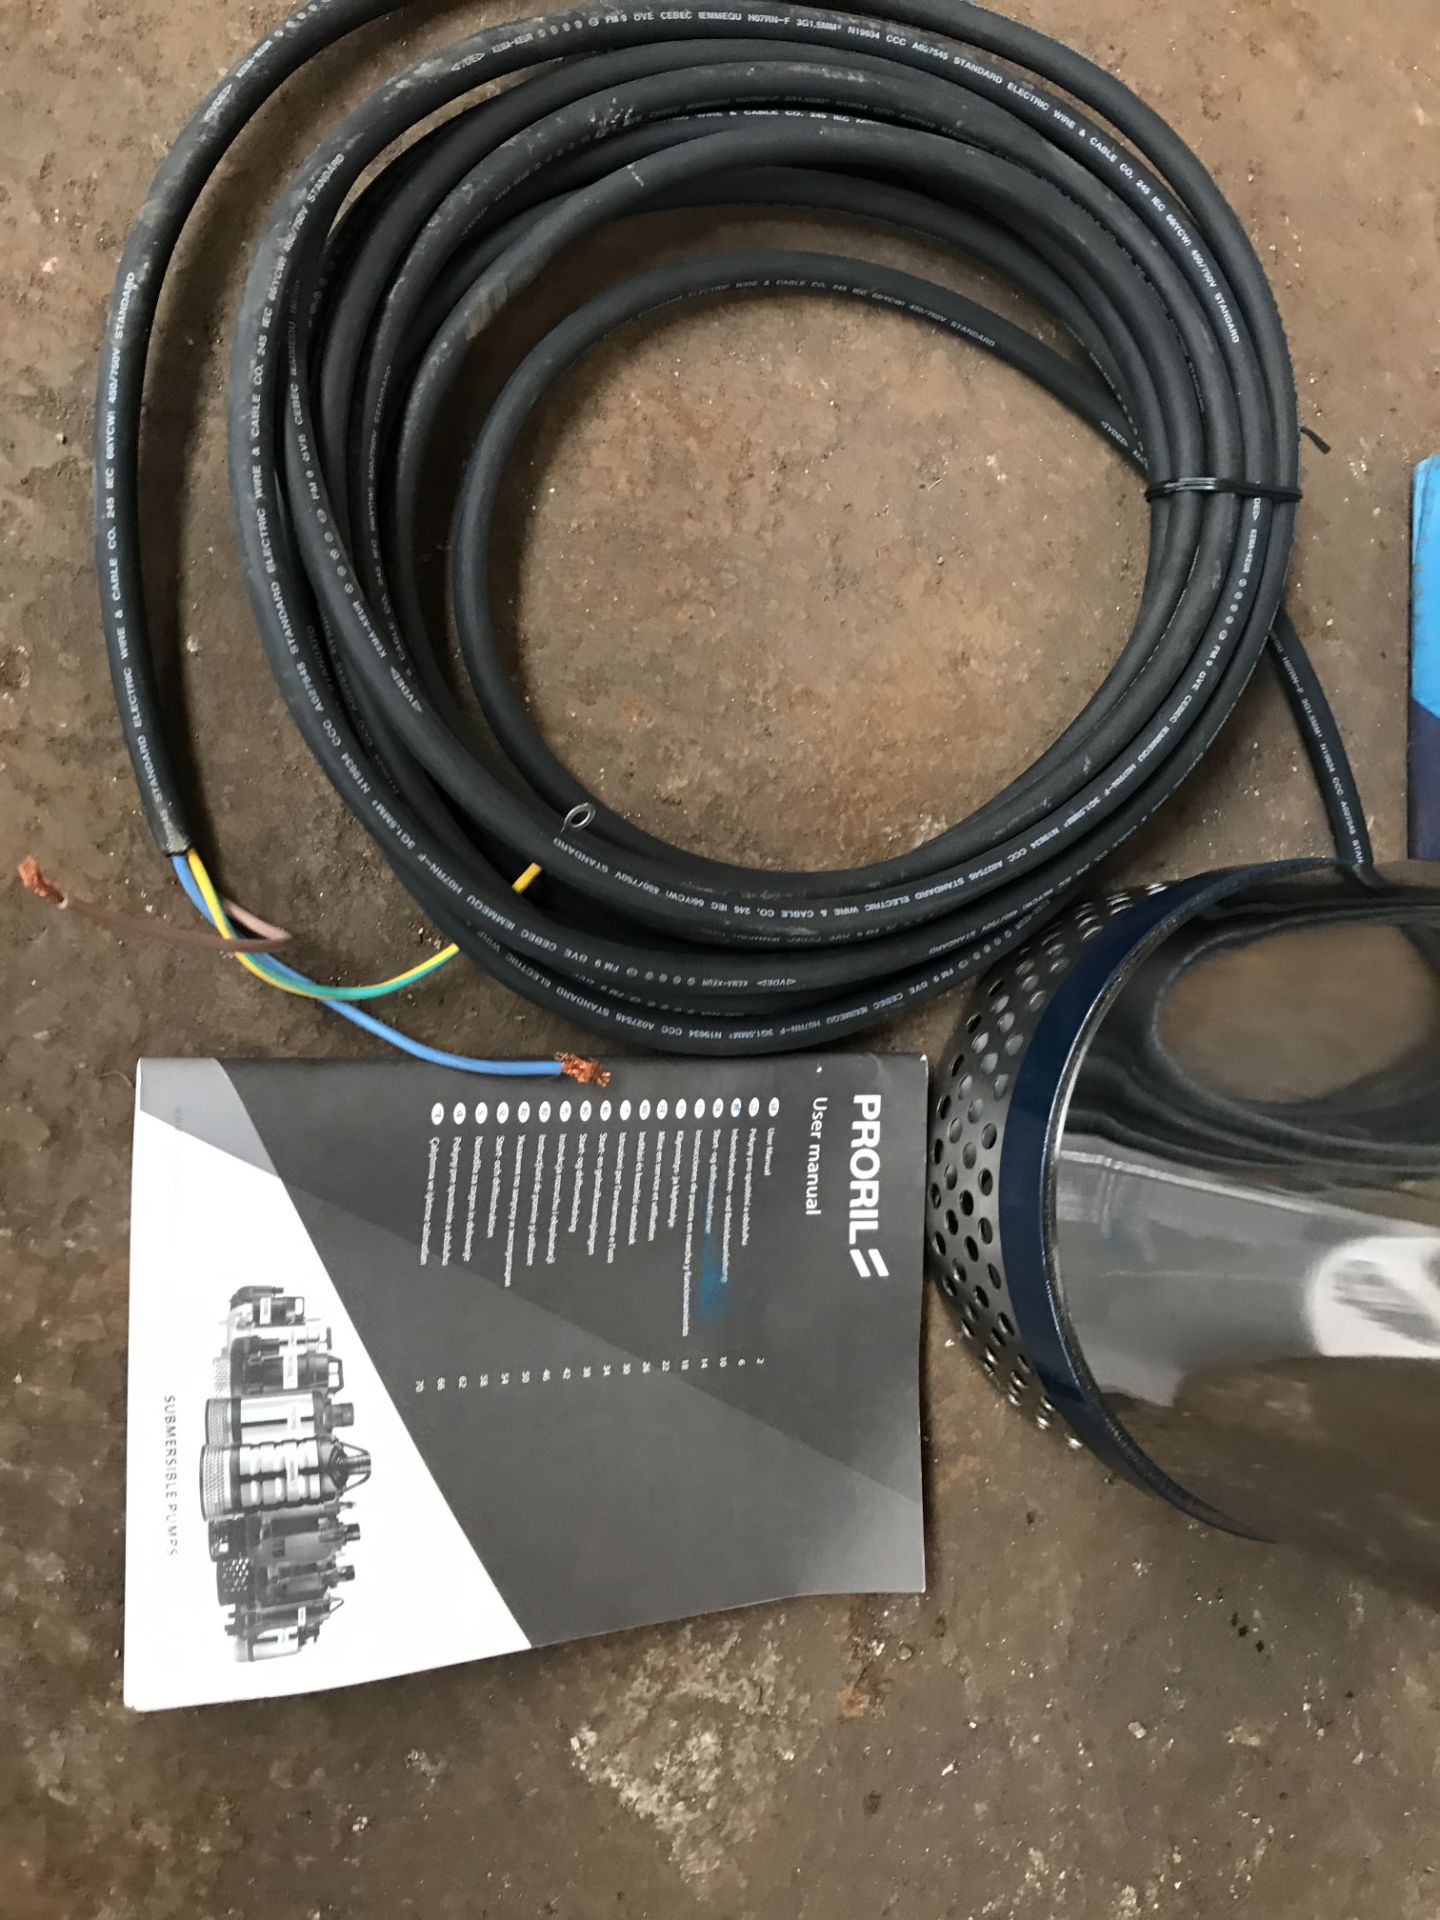 Unused Proril SMART 750 Submersible Drainer Pump | 110v | Ref: RE1163 - Image 3 of 5